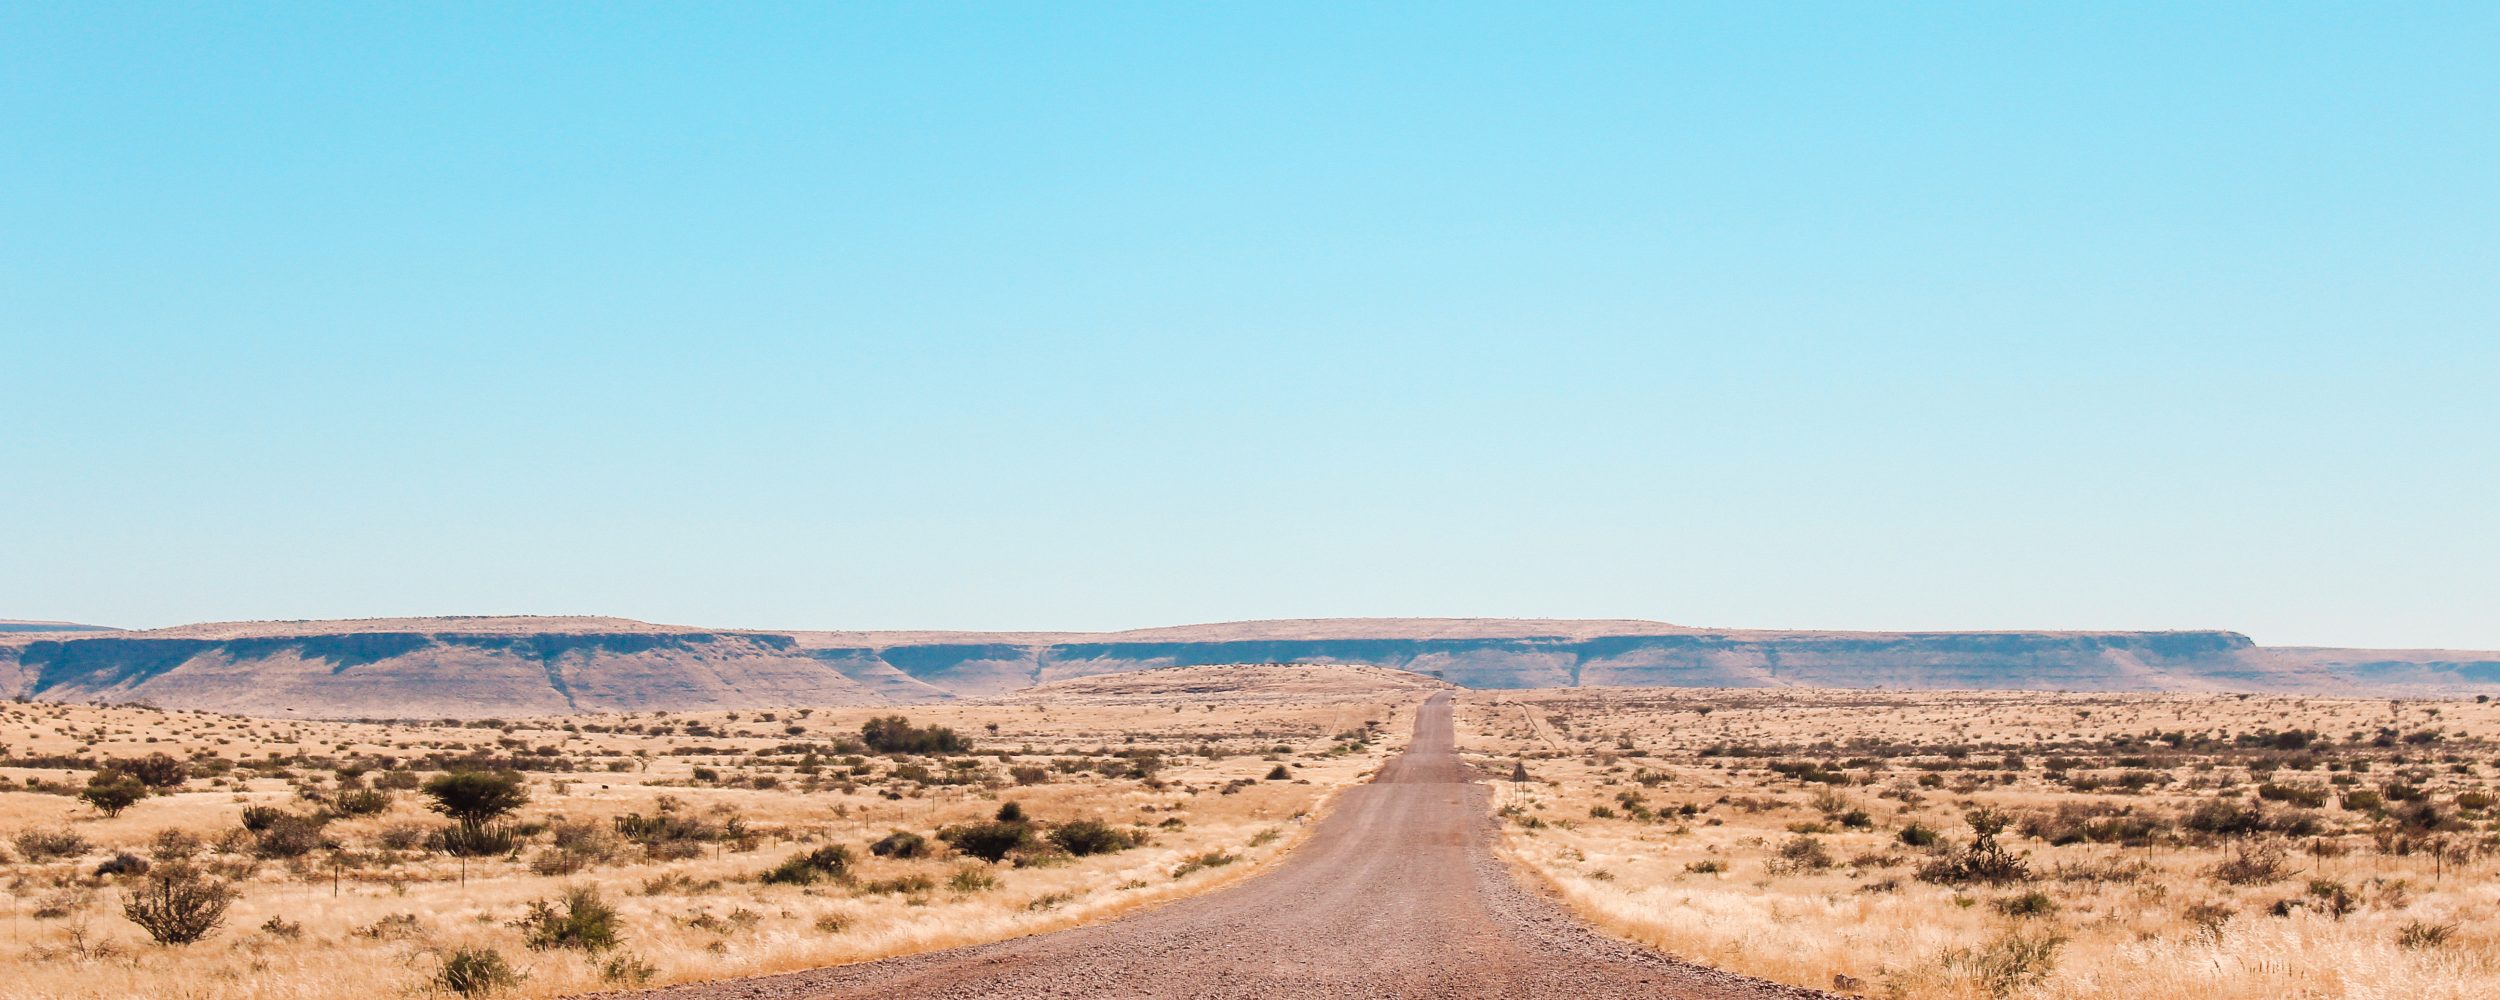 A gravel road in Namibia